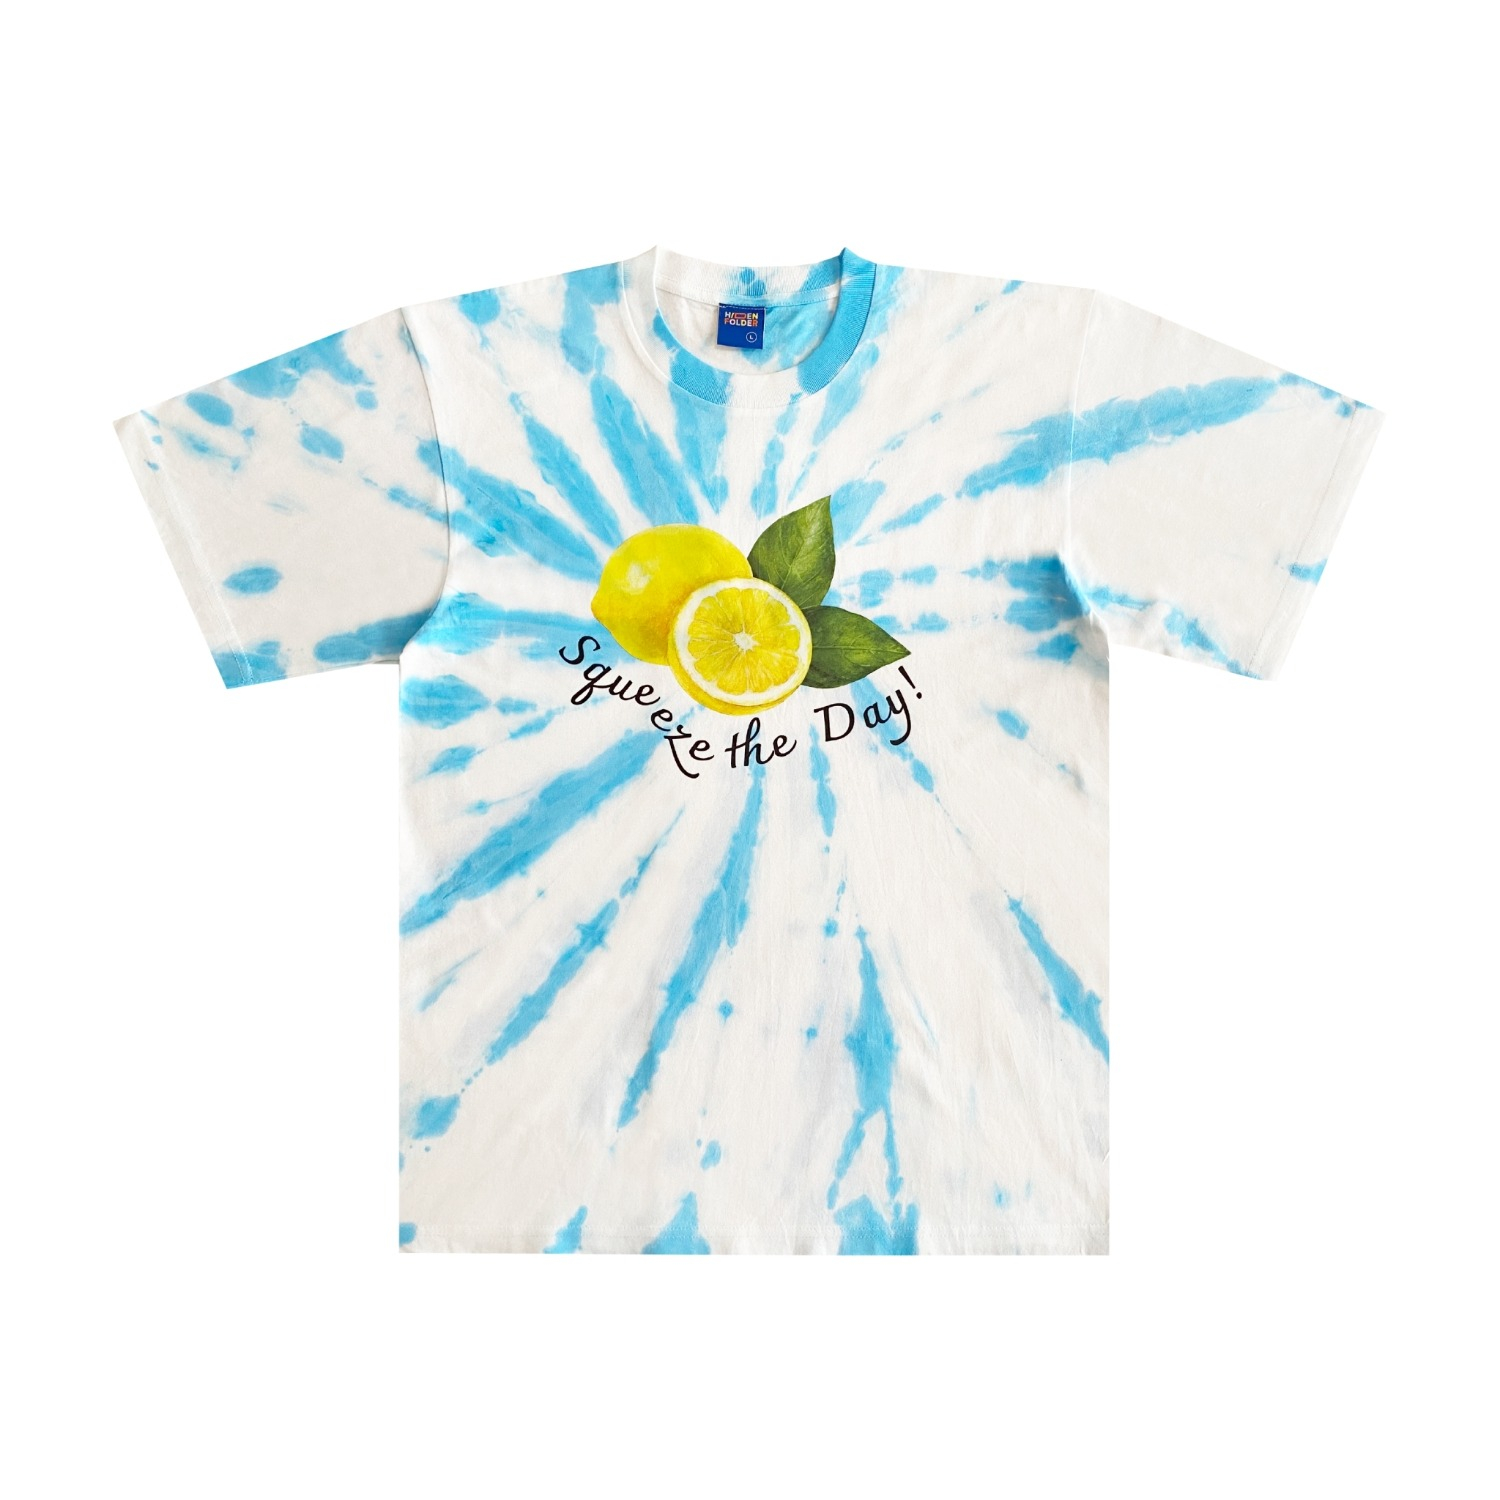 Squeeze the Day ! : Tie-dye